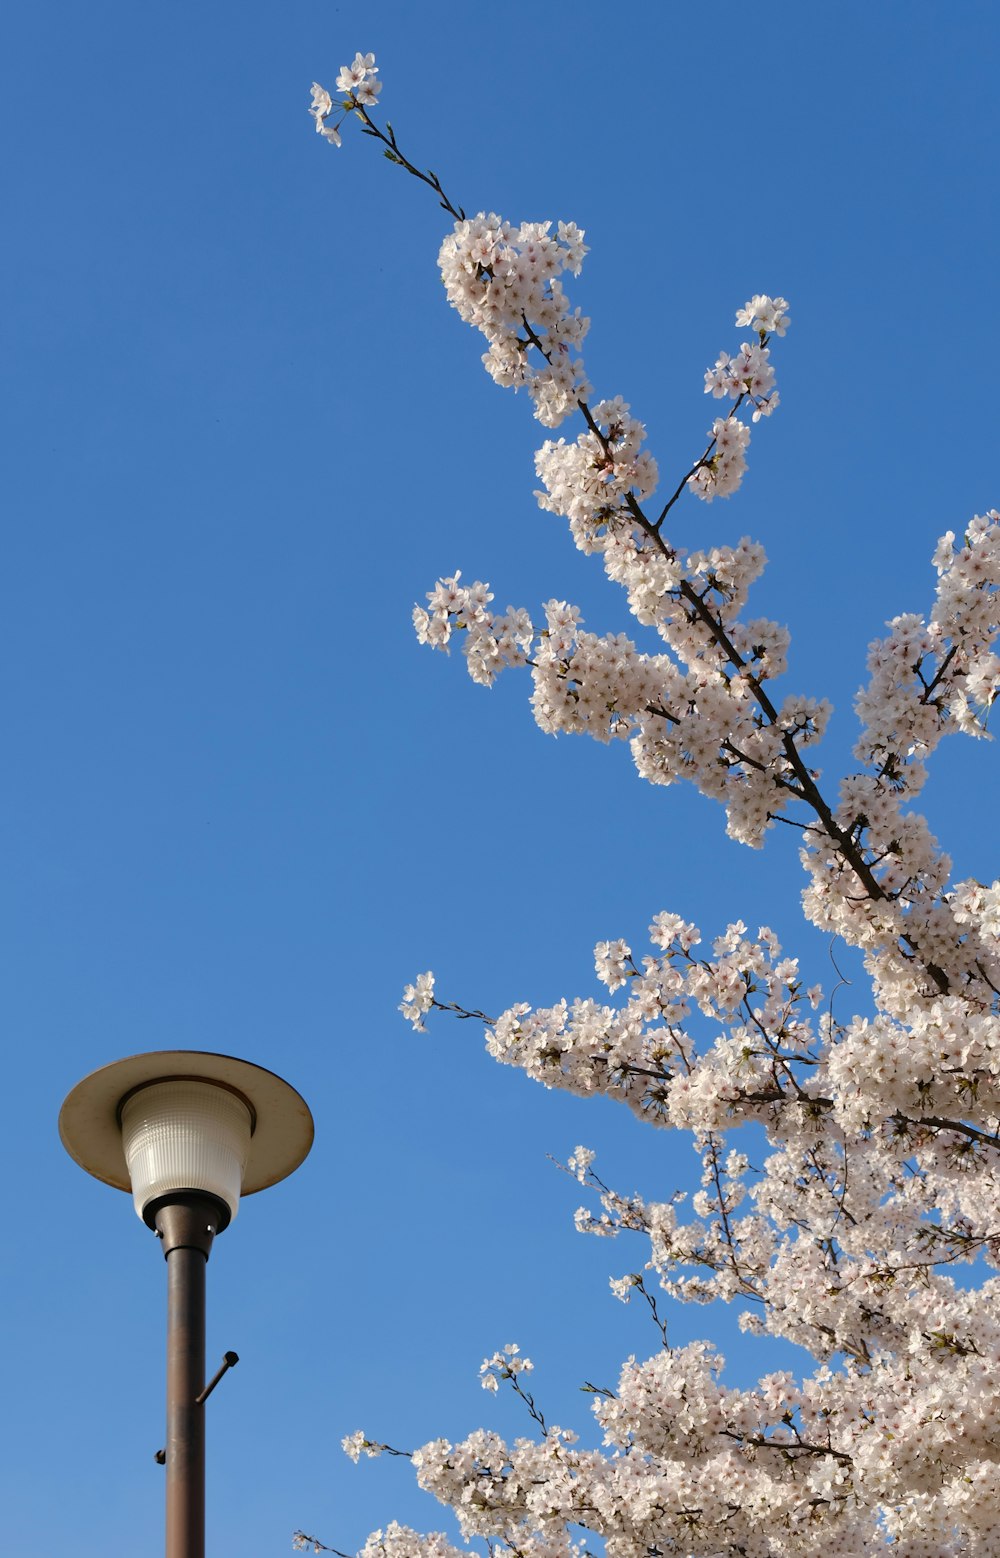 a lamp post and flowering tree against a blue sky